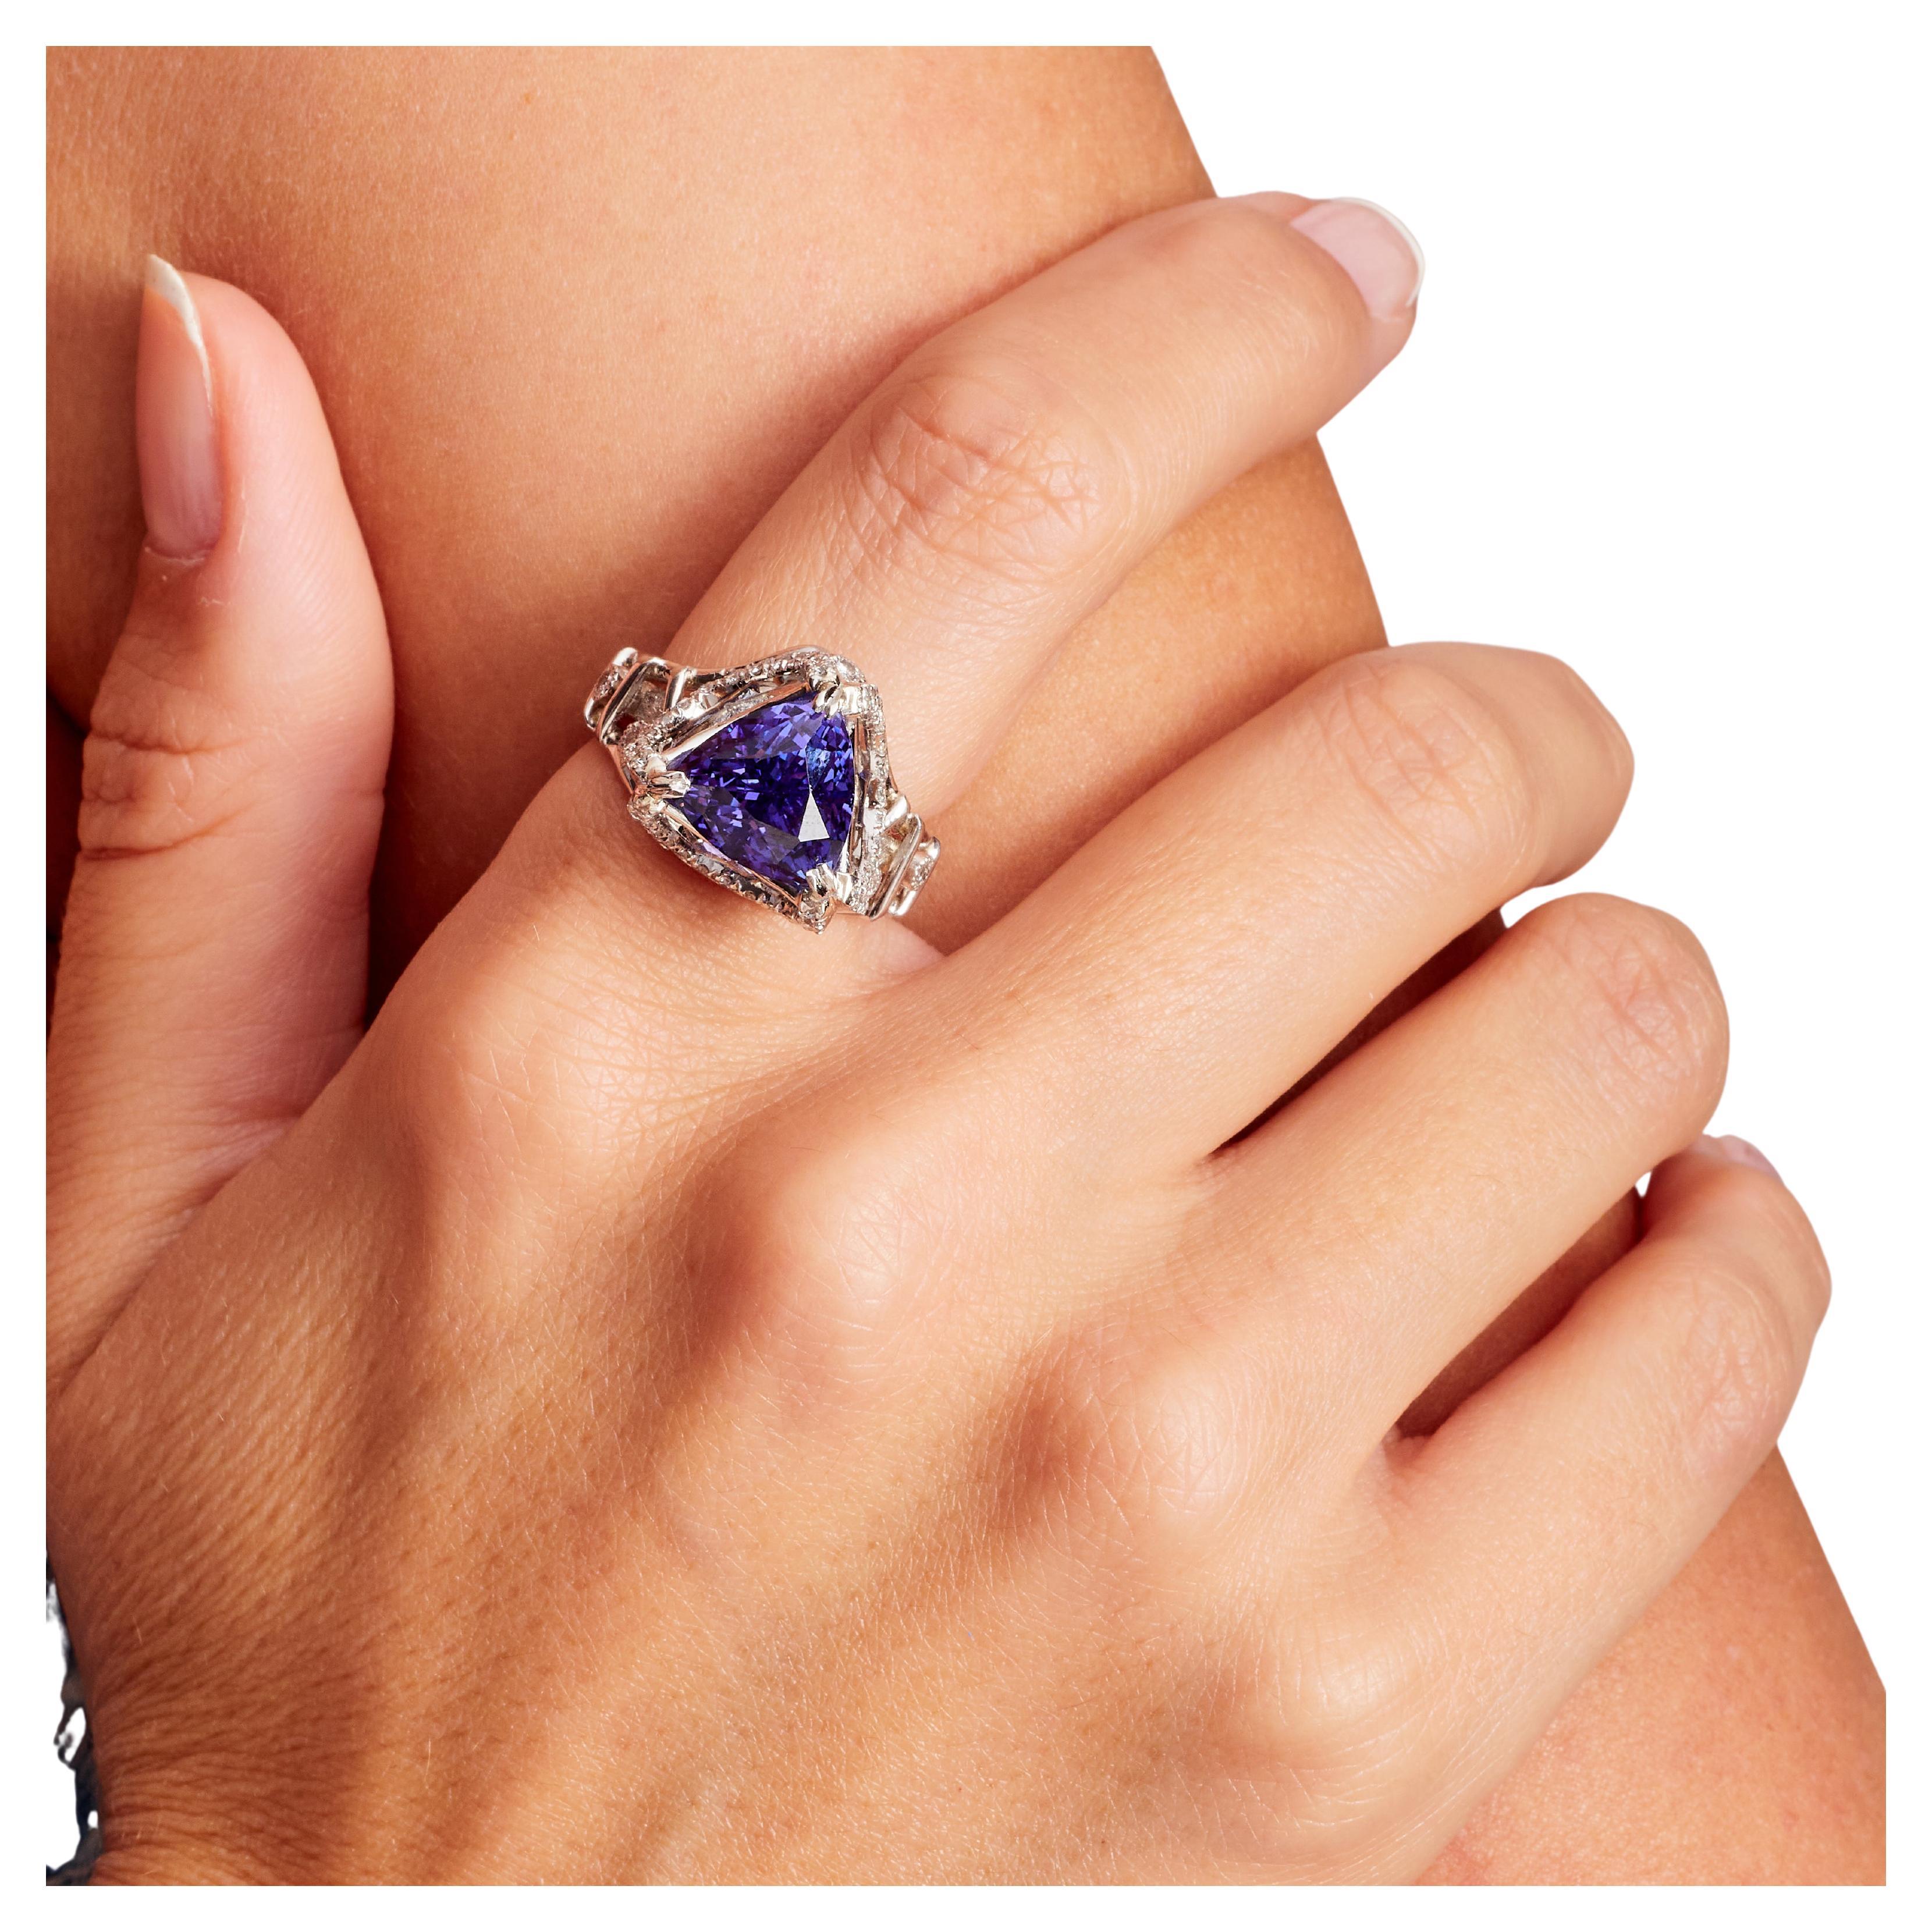 6.54 Carat Tanzanite, Diamond, Platinum Cocktail Ring, In Stock. This large trillion-cut tanzanite (H) statement ring features a big indigo stone set in platinum with pave diamonds on the shoulders and prongs. This tanzanite trillion (H) center